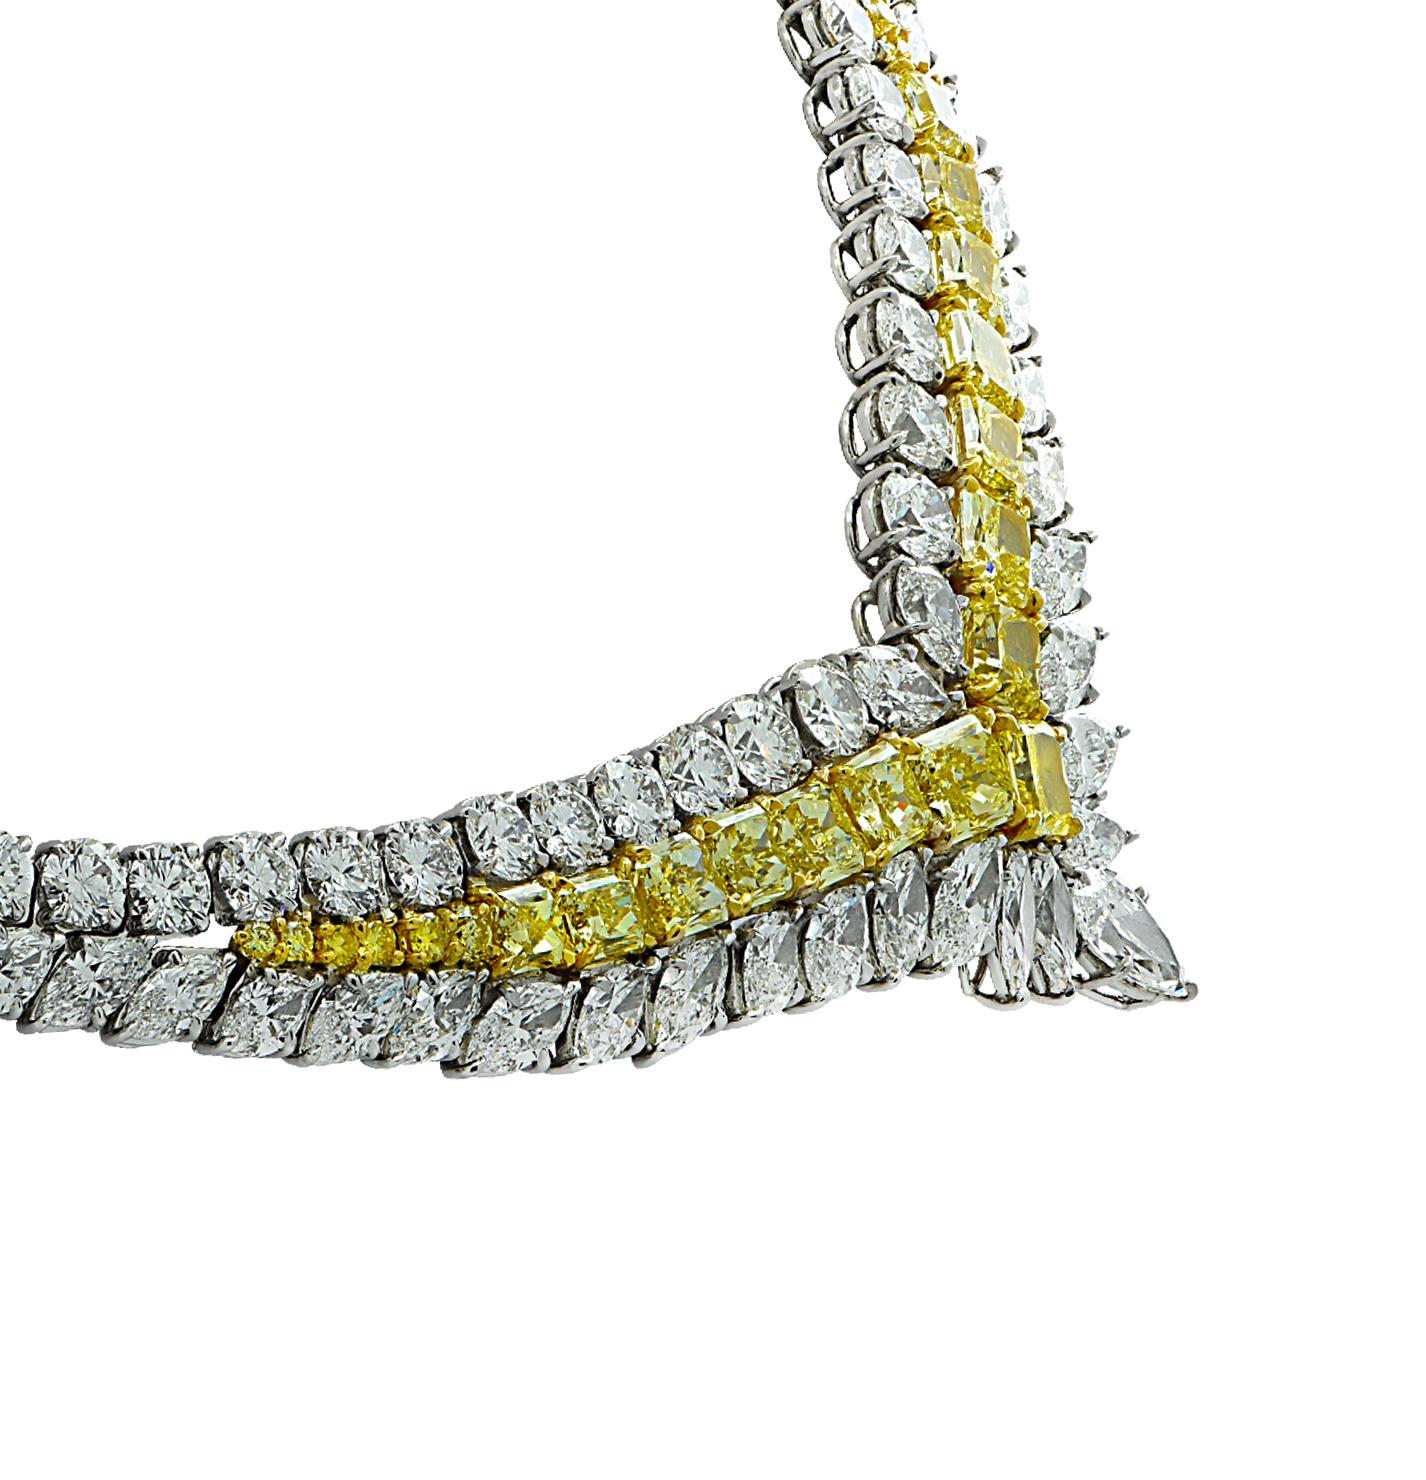 80.81 Carat GIA Certified Fancy Intense Yellow and White Diamond Necklace For Sale 2